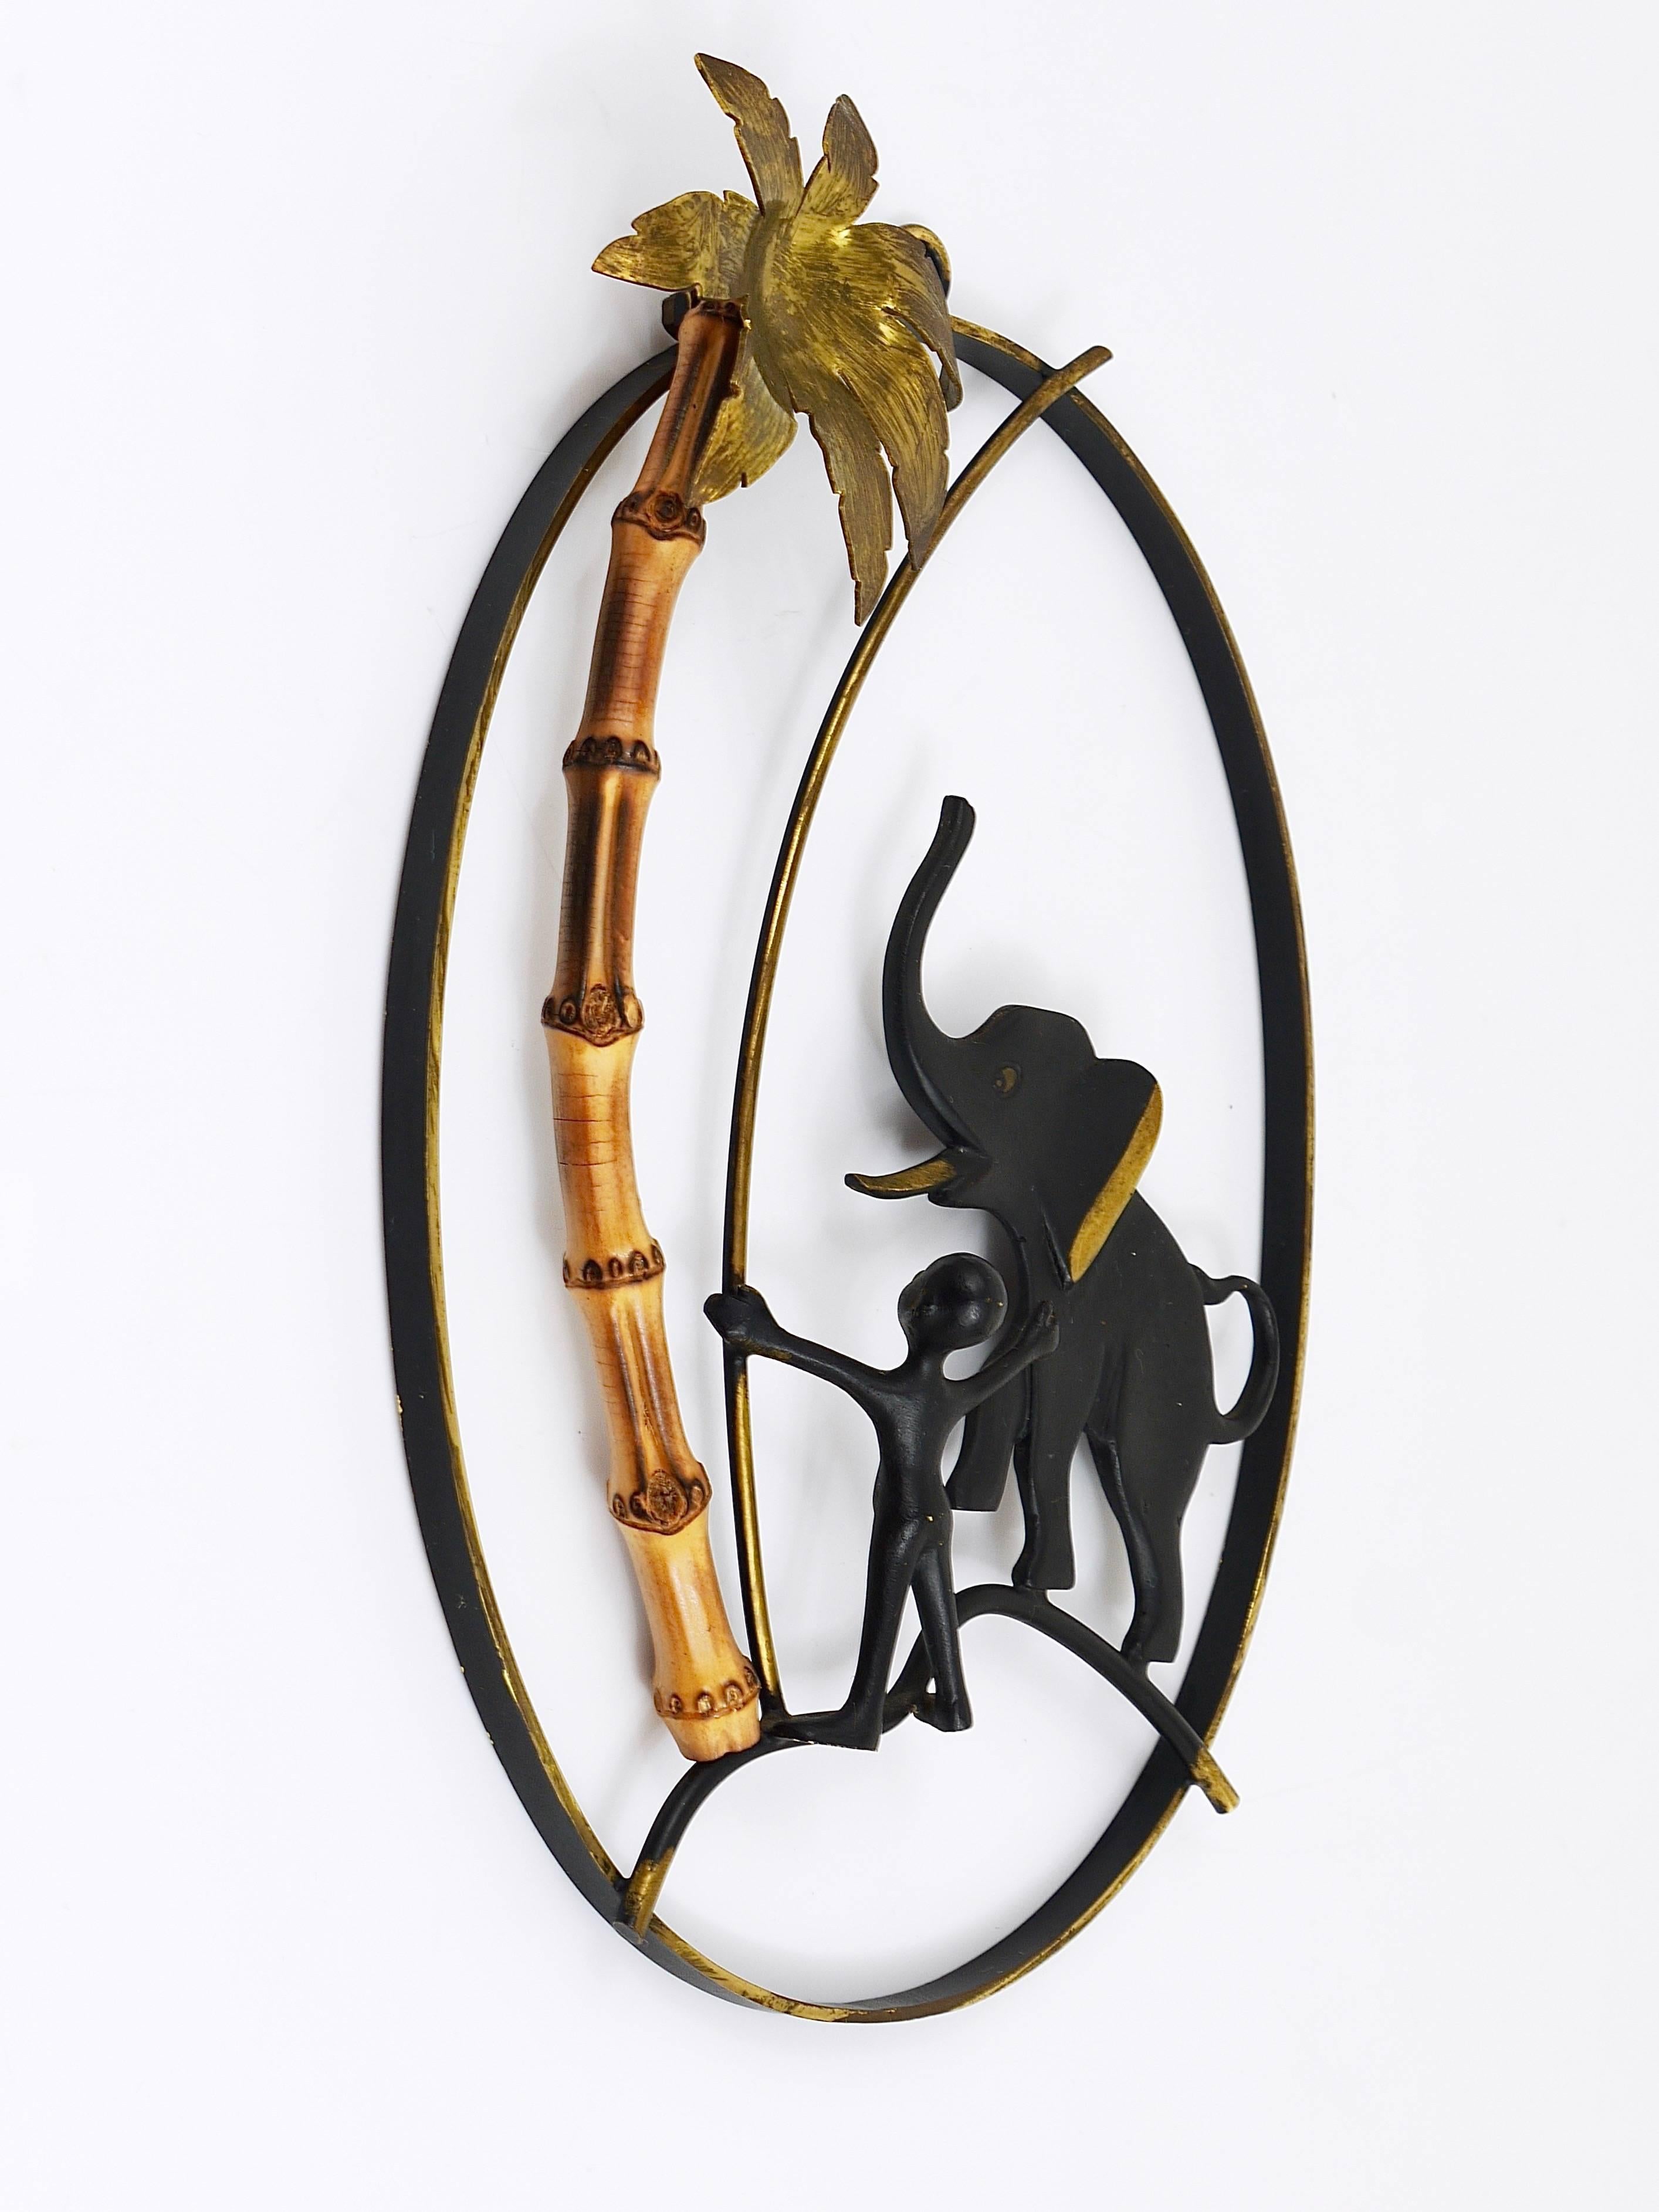 A lovely Mid-Century wall-mounted brass sculpture, displaying an African and an elephant under a palm tree on a frame, made of black-finished brass and bamboo. Designed by Walter Bosse, manufactured in the 1950s by Hertha Baller, Austria. In